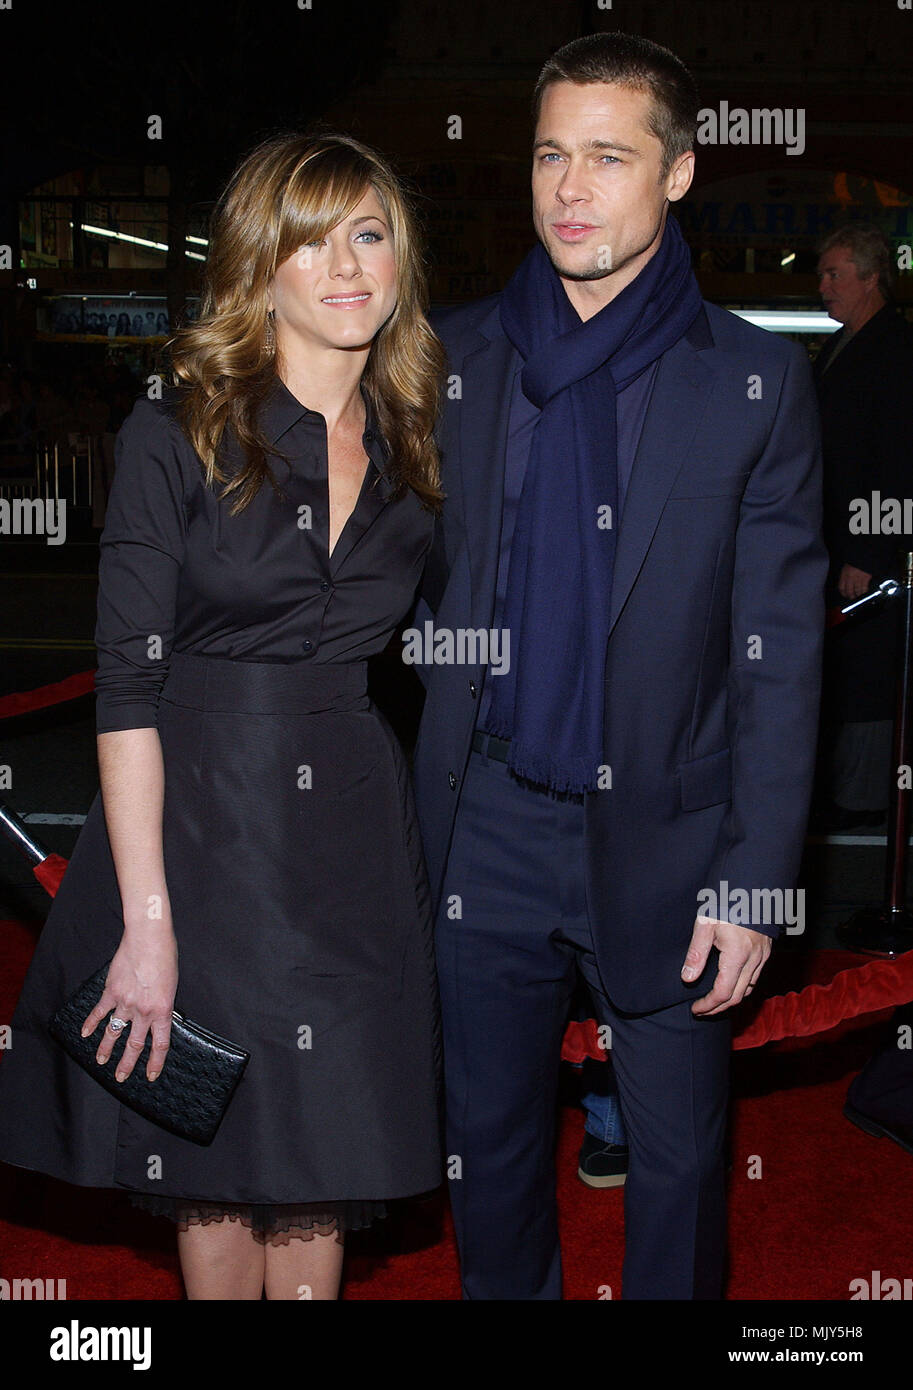 Brad Pitt and Jennifer Aniston arriving at the premiere of ' Along Came Polly ' at the Chinese Theatre in Los Angeles. january 12, 2004.          -            AnistonJenn PittBrad031.JPG           -              AnistonJenn PittBrad031.JPGAnistonJenn PittBrad031  Event in Hollywood Life - California,  Red Carpet Event, Vertical, USA, Film Industry, Celebrities,  Photography, Bestof, Arts Culture and Entertainment, Topix Celebrities fashion /  from the Red Carpet-, Vertical, Best of, Hollywood Life, Event in Hollywood Life - California,  Red Carpet , USA, Film Industry, Celebrities,  movie cele Stock Photo